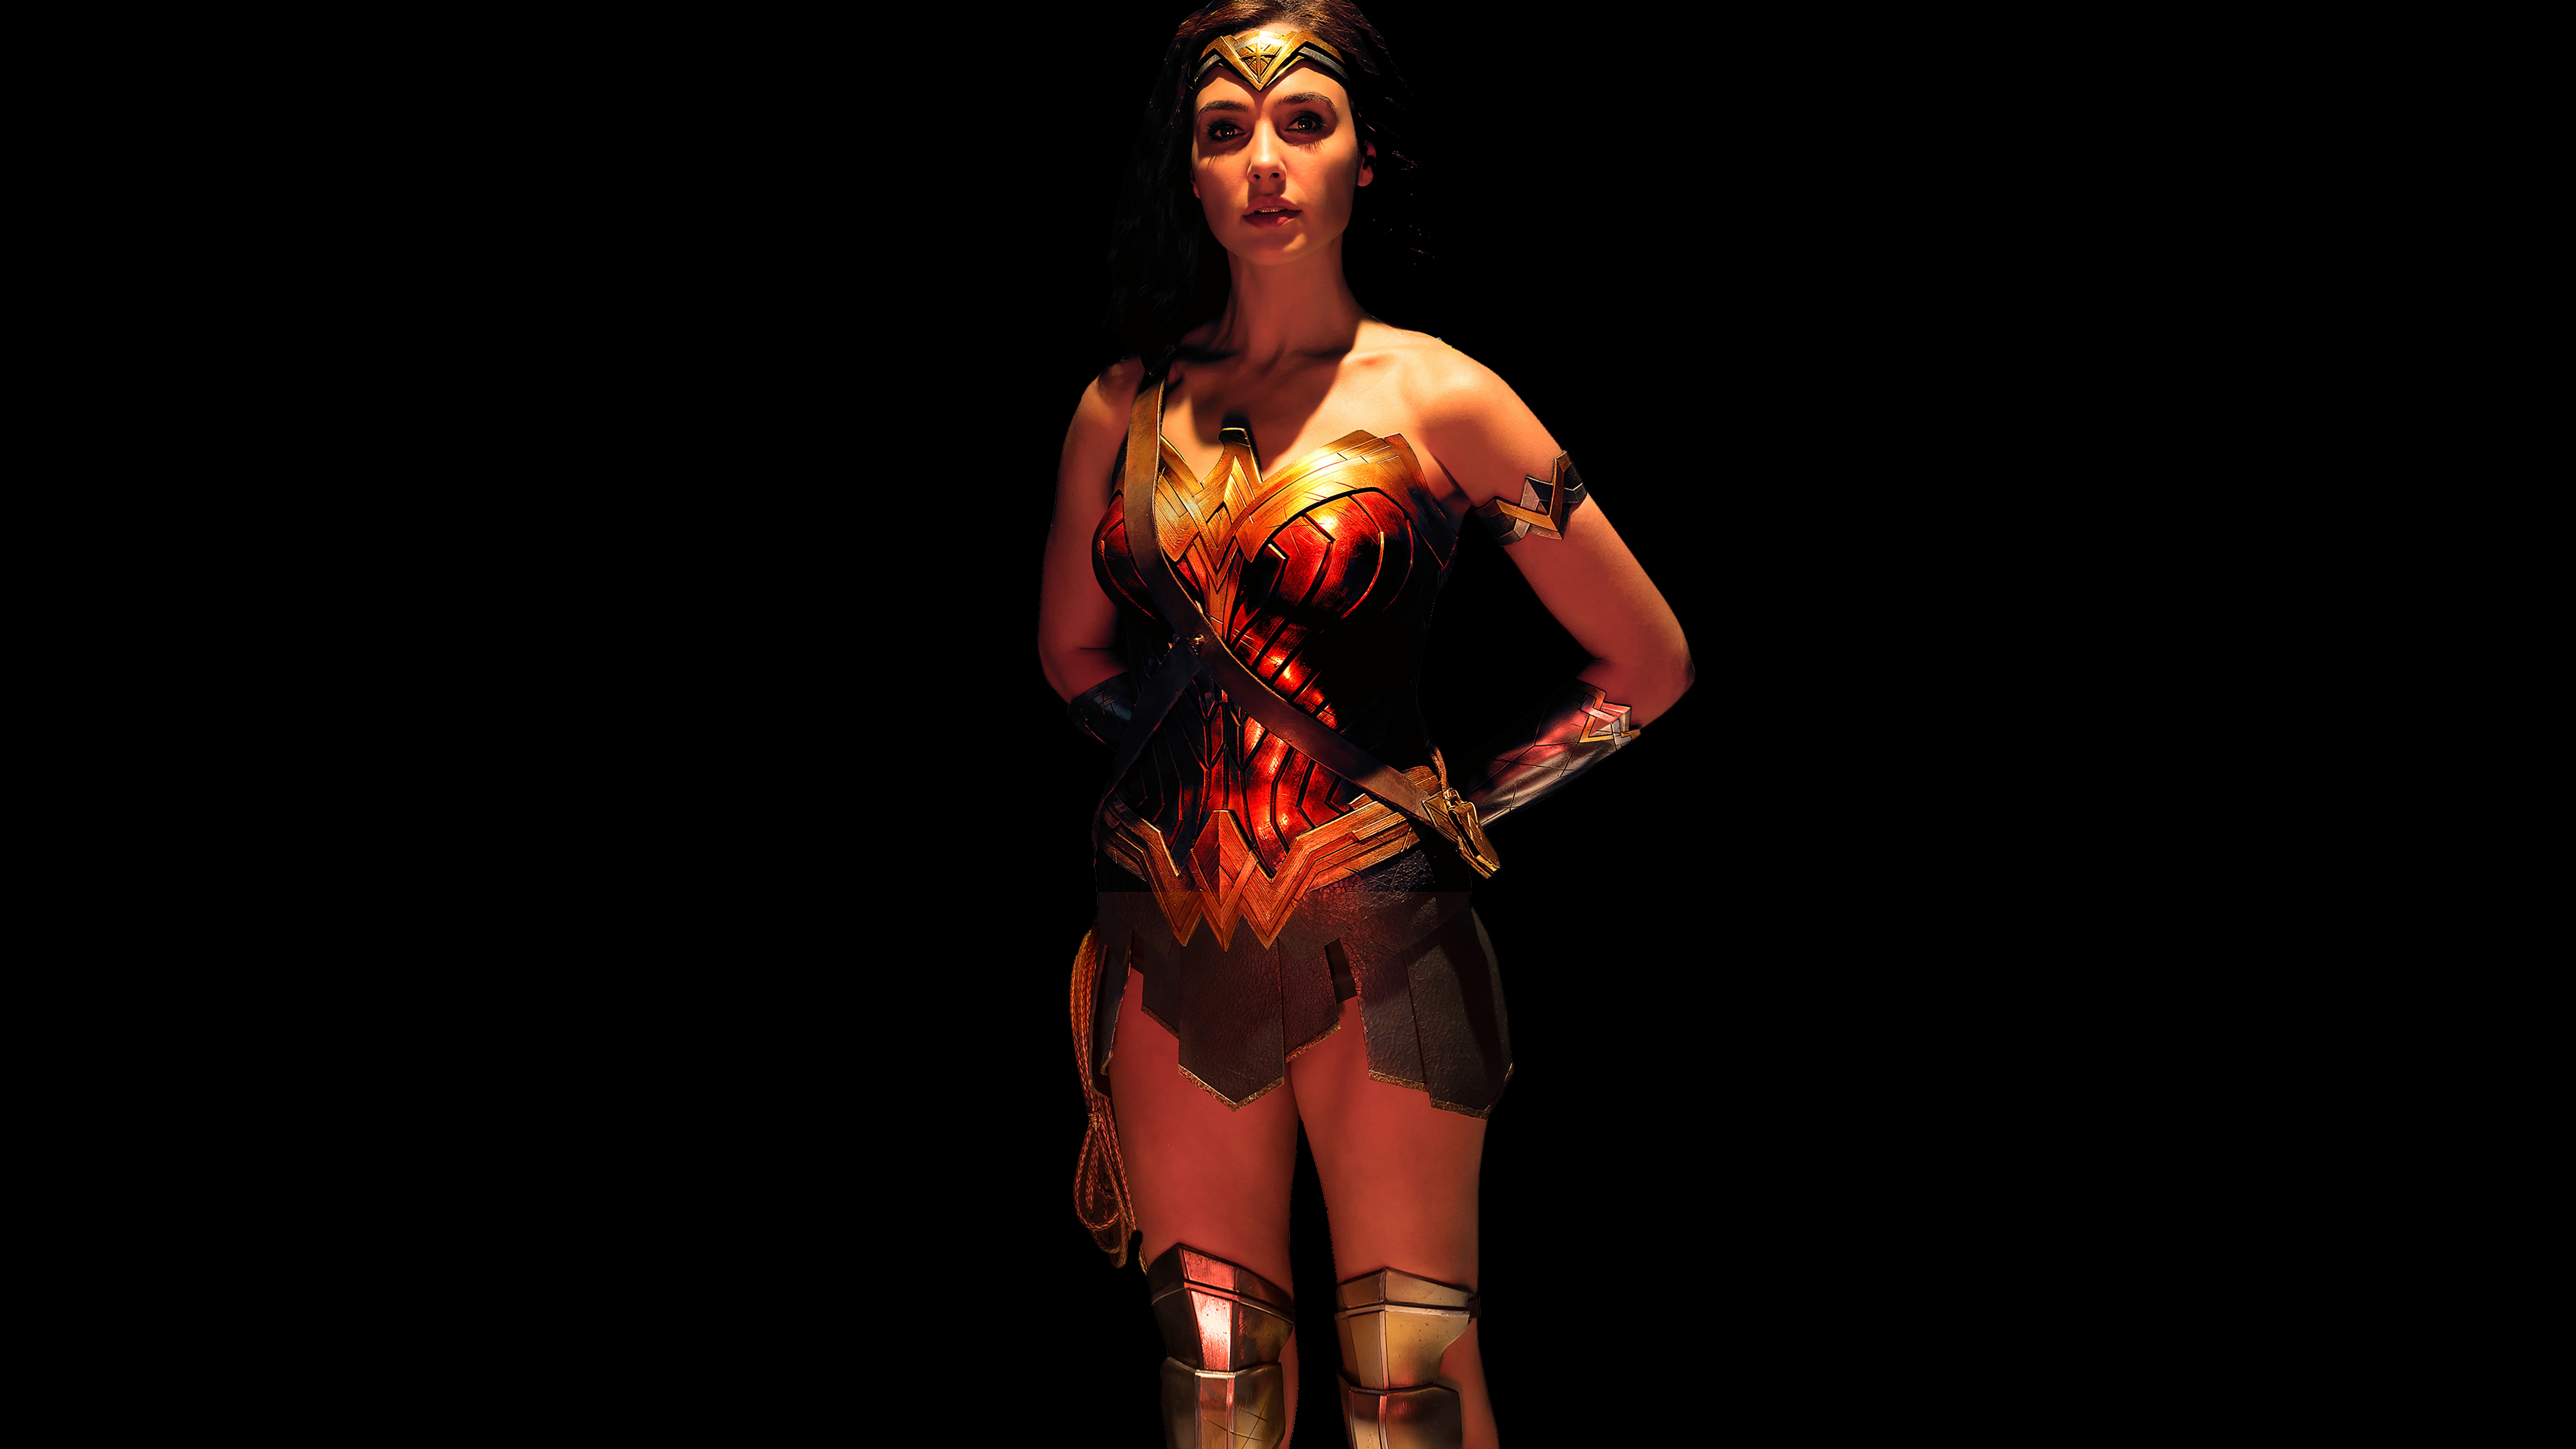 wonder woman, justice league (2017), gal gadot, movie, justice league, diana of themyscira cell phone wallpapers